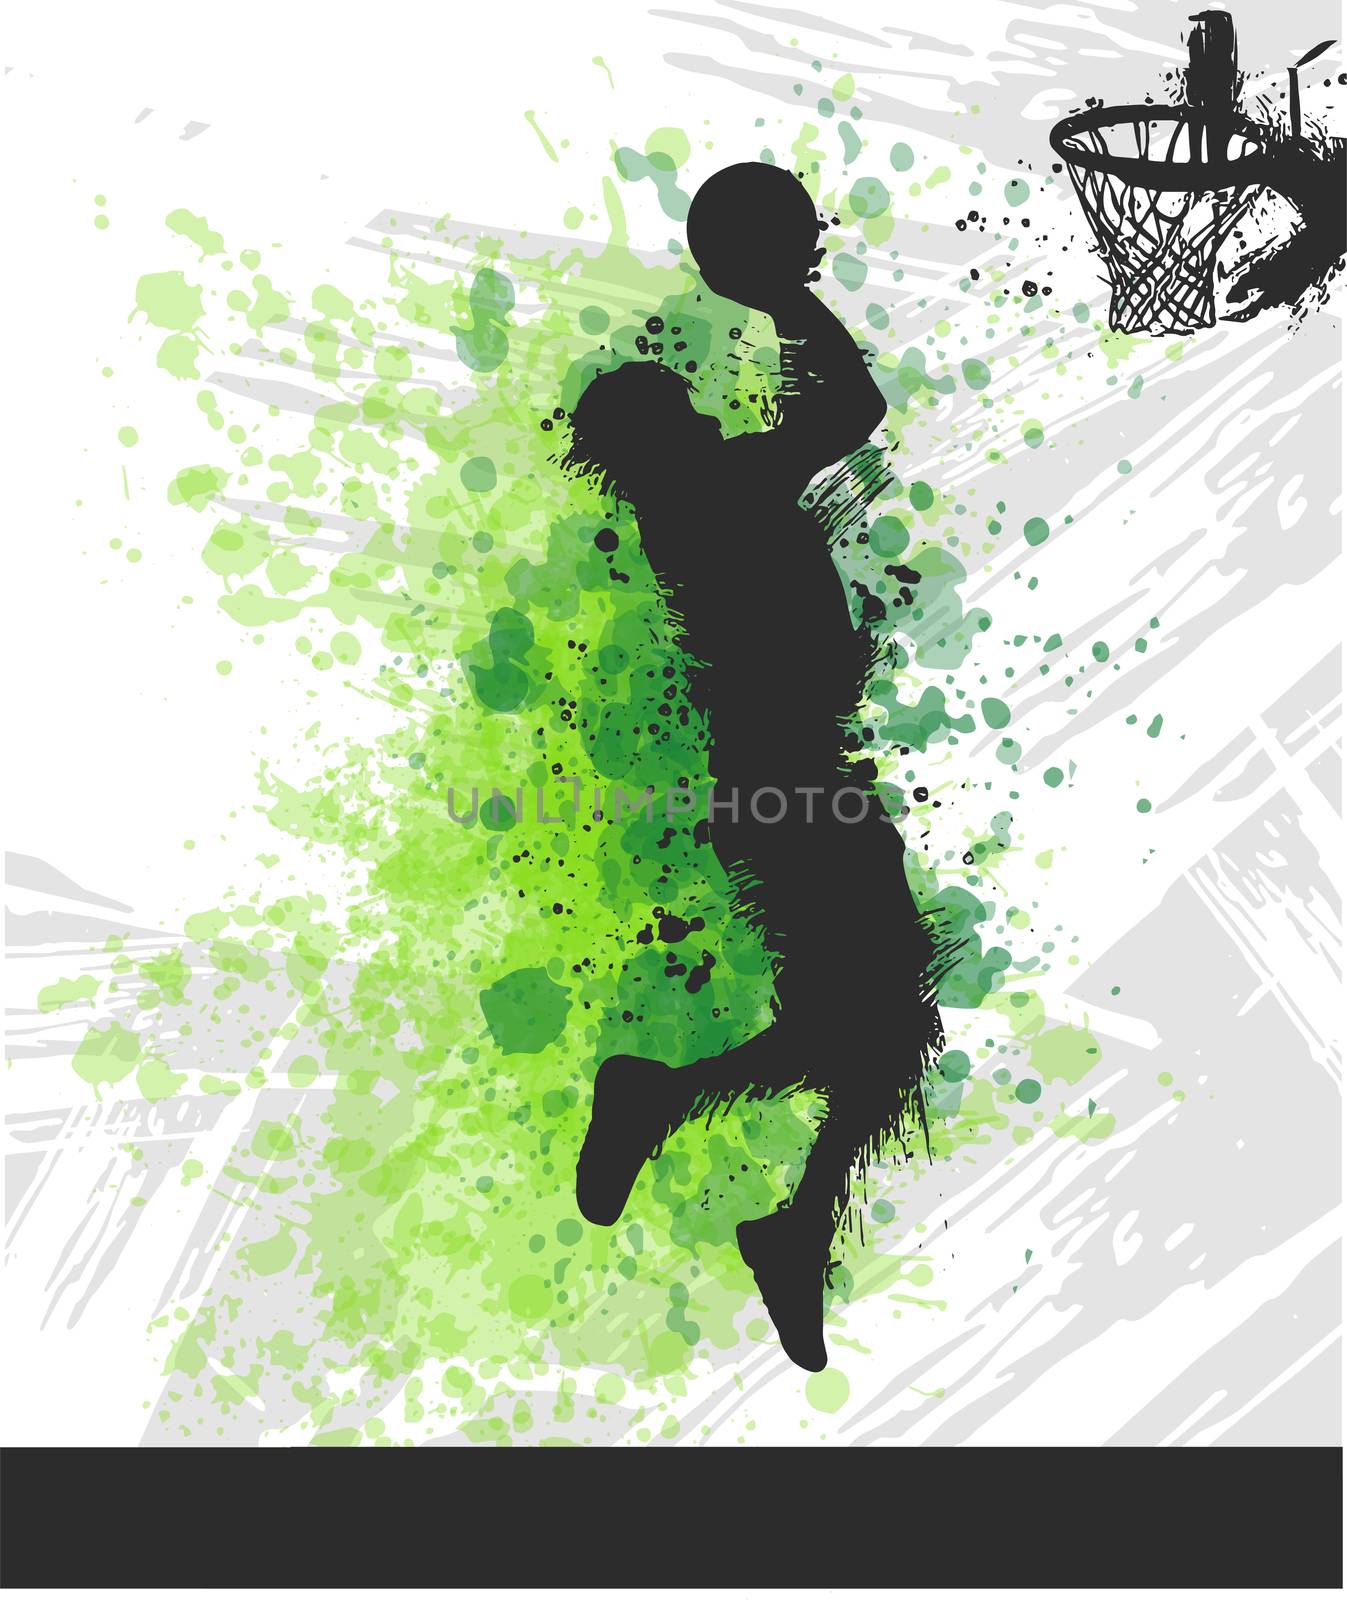 Digital illustration painting of a basketball player by dean